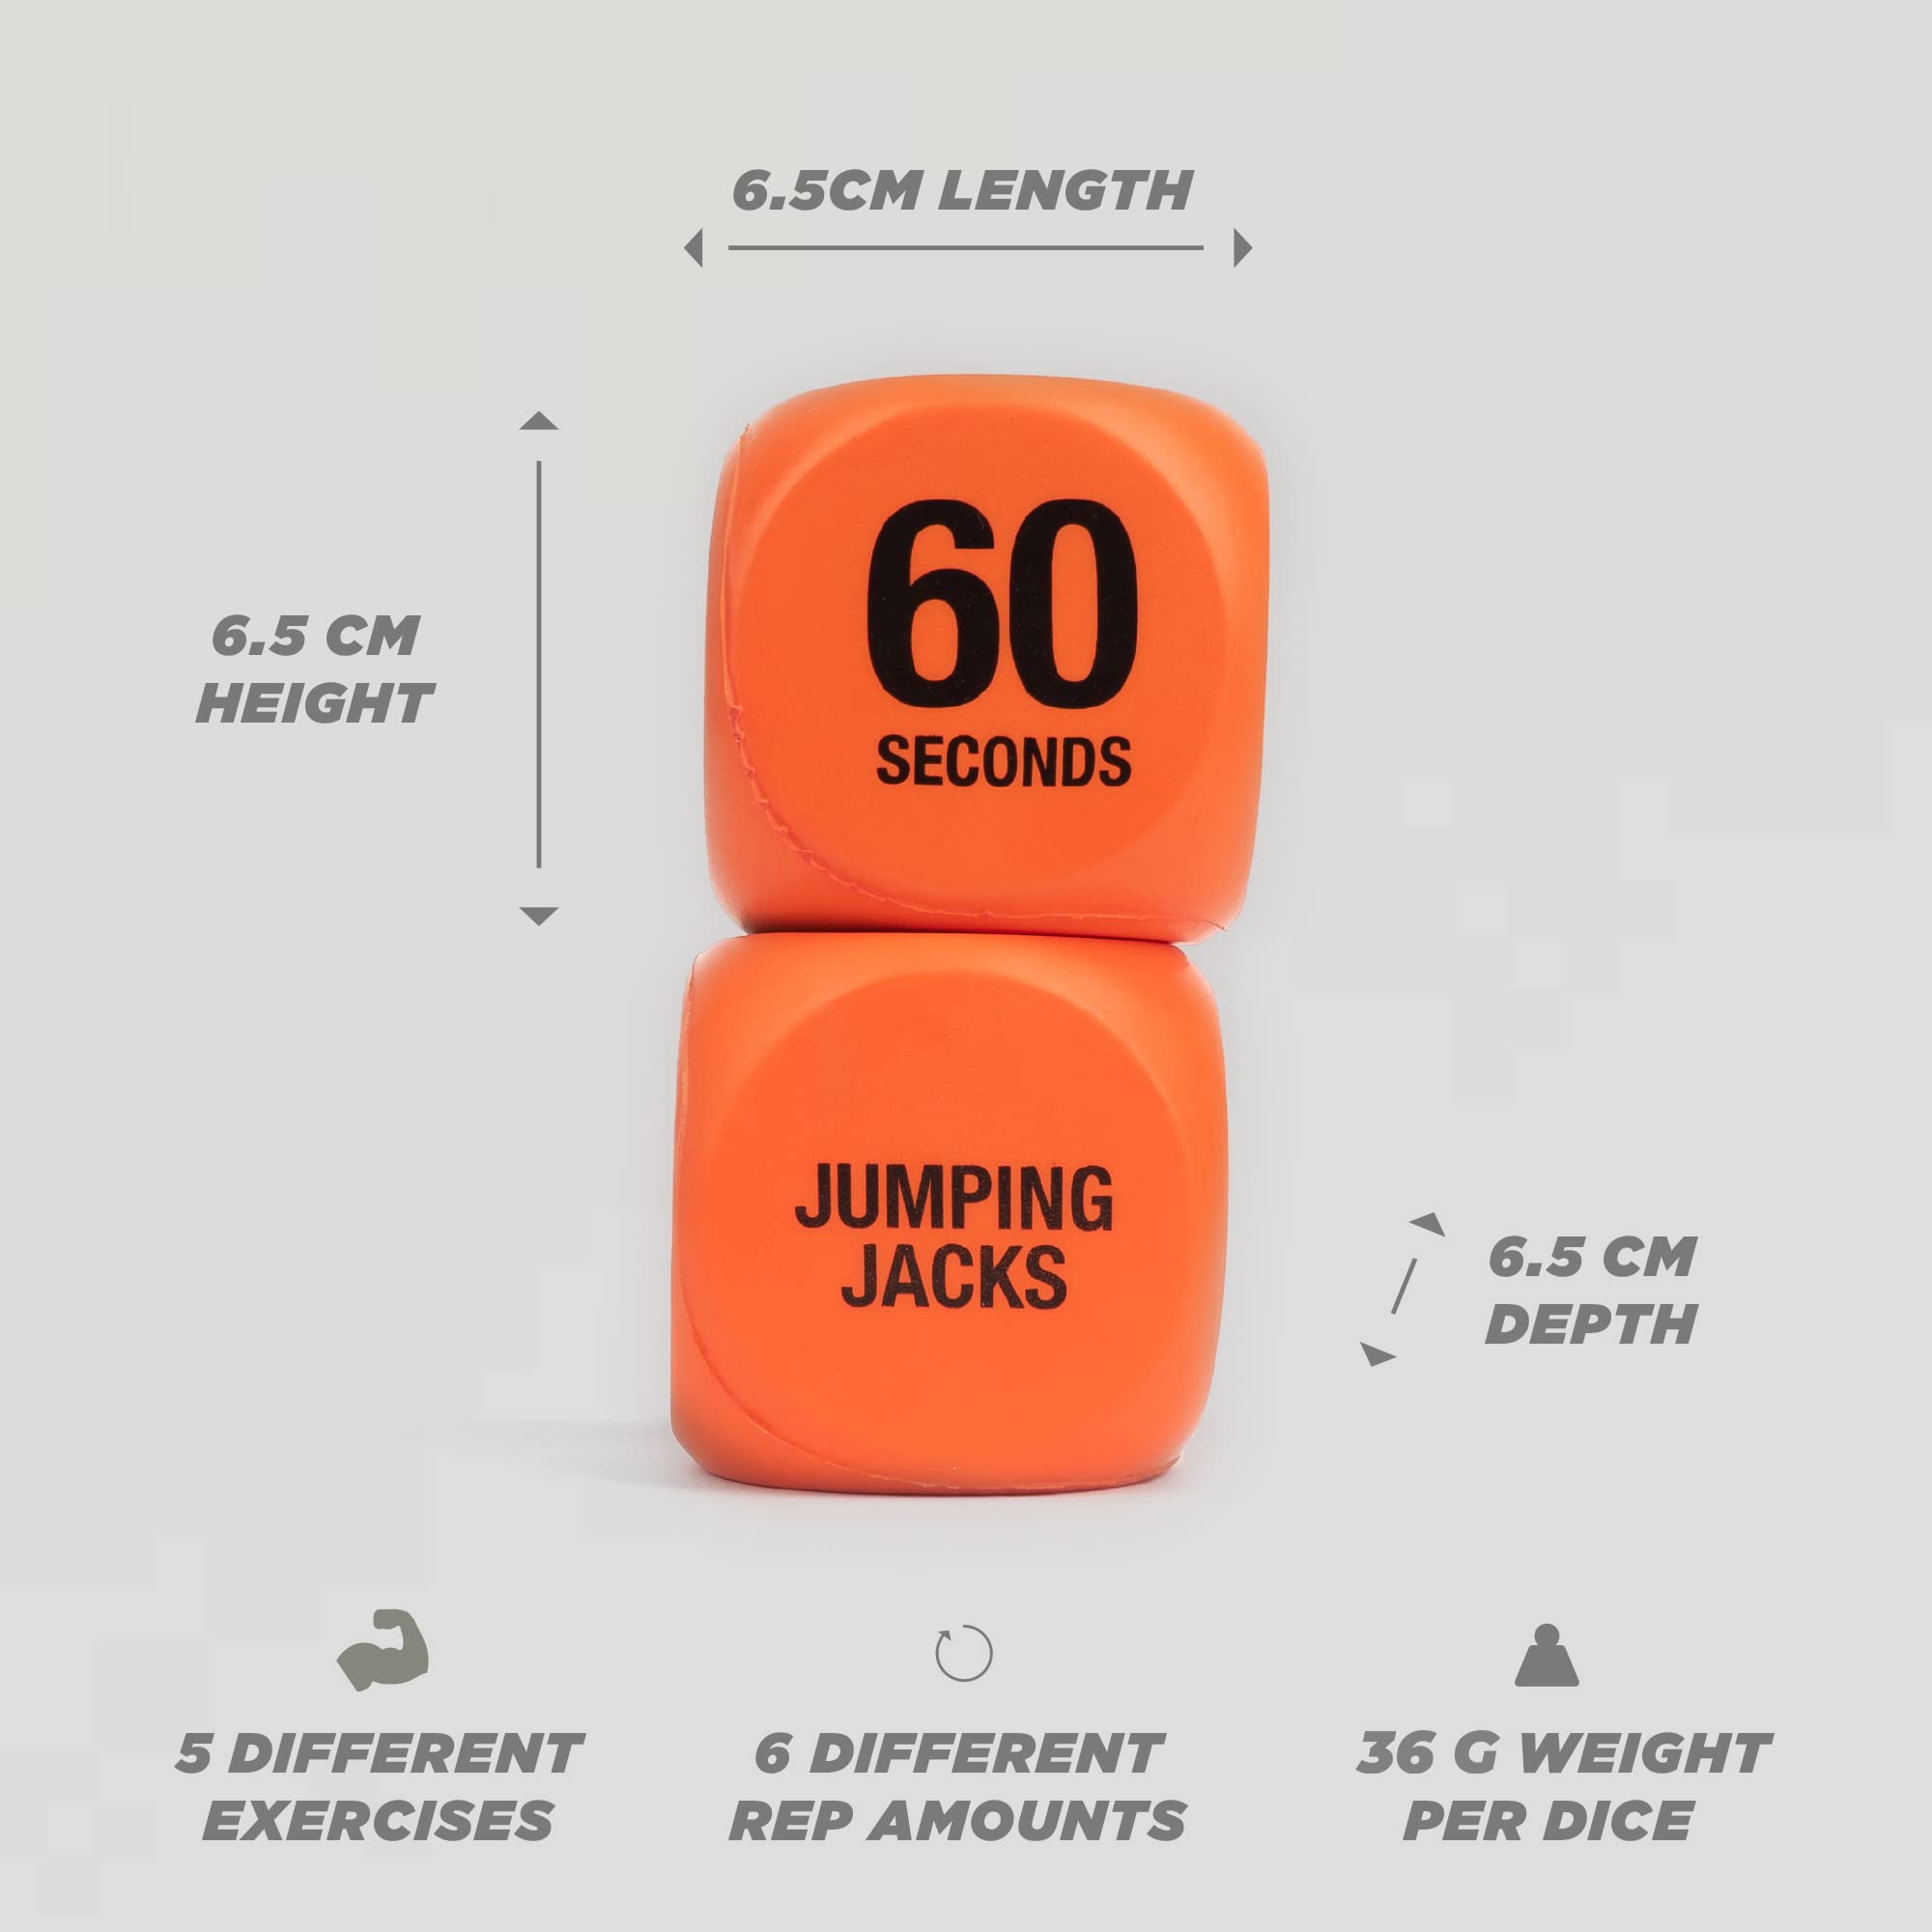 Phoenix Fitness Exercise Dice - Workout Dice Game for Cardio, HIIT and Exercise Classes - Full Body Training Routine for Home & Gym - Orange